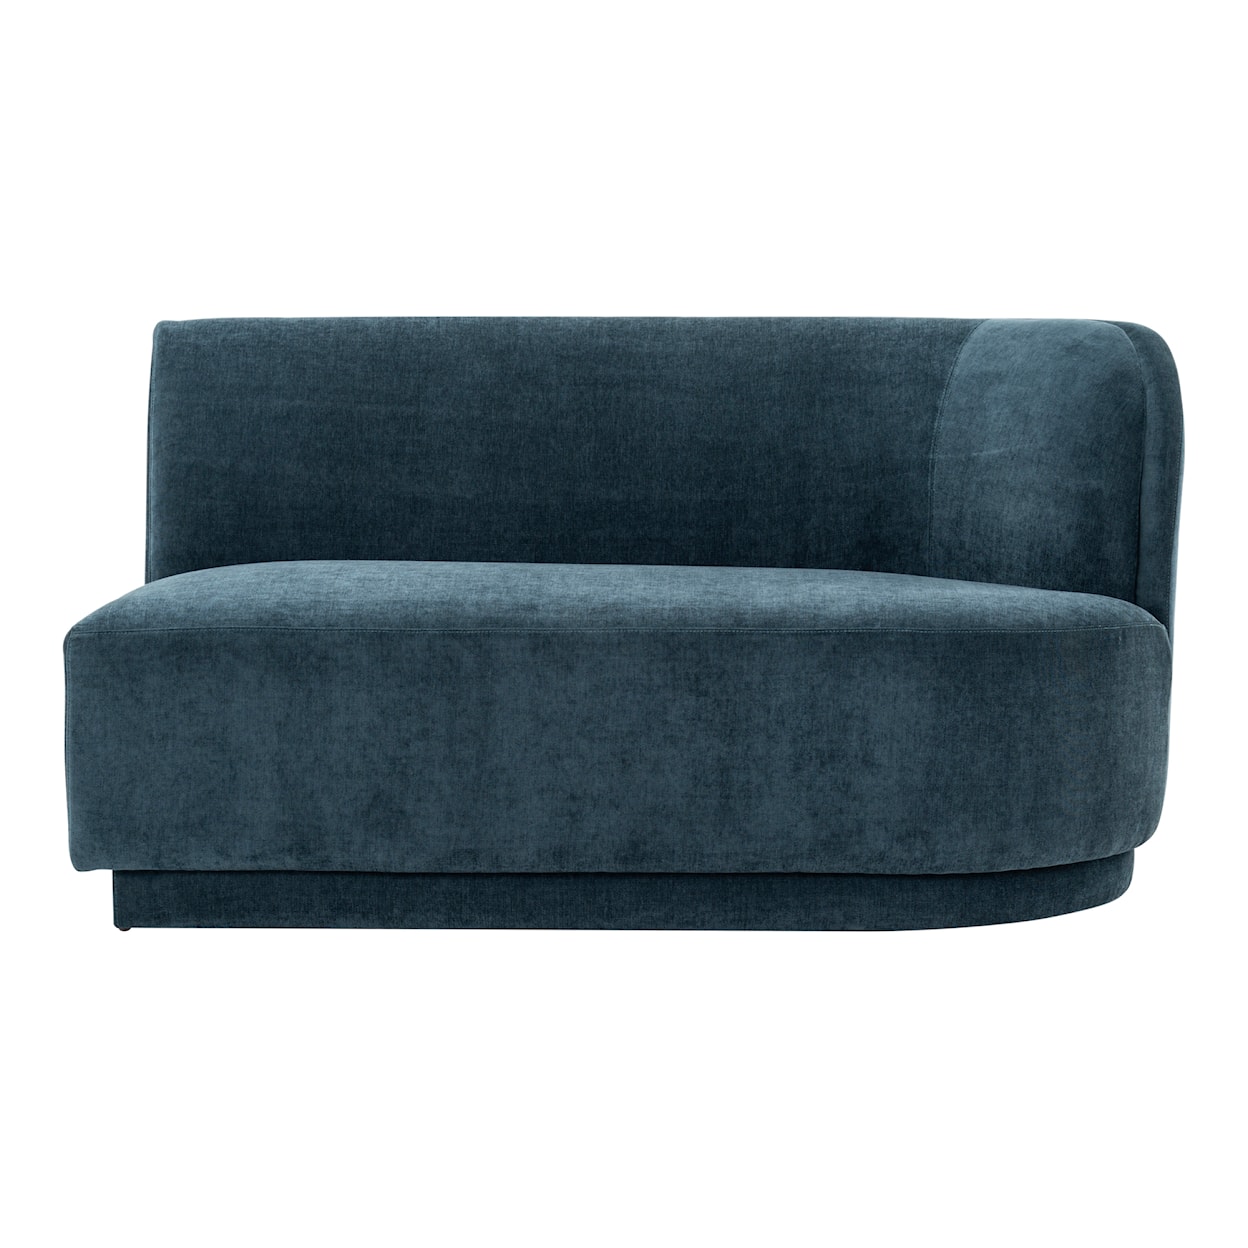 Moe's Home Collection Yoon Yoon 2 Seat Sofa Right